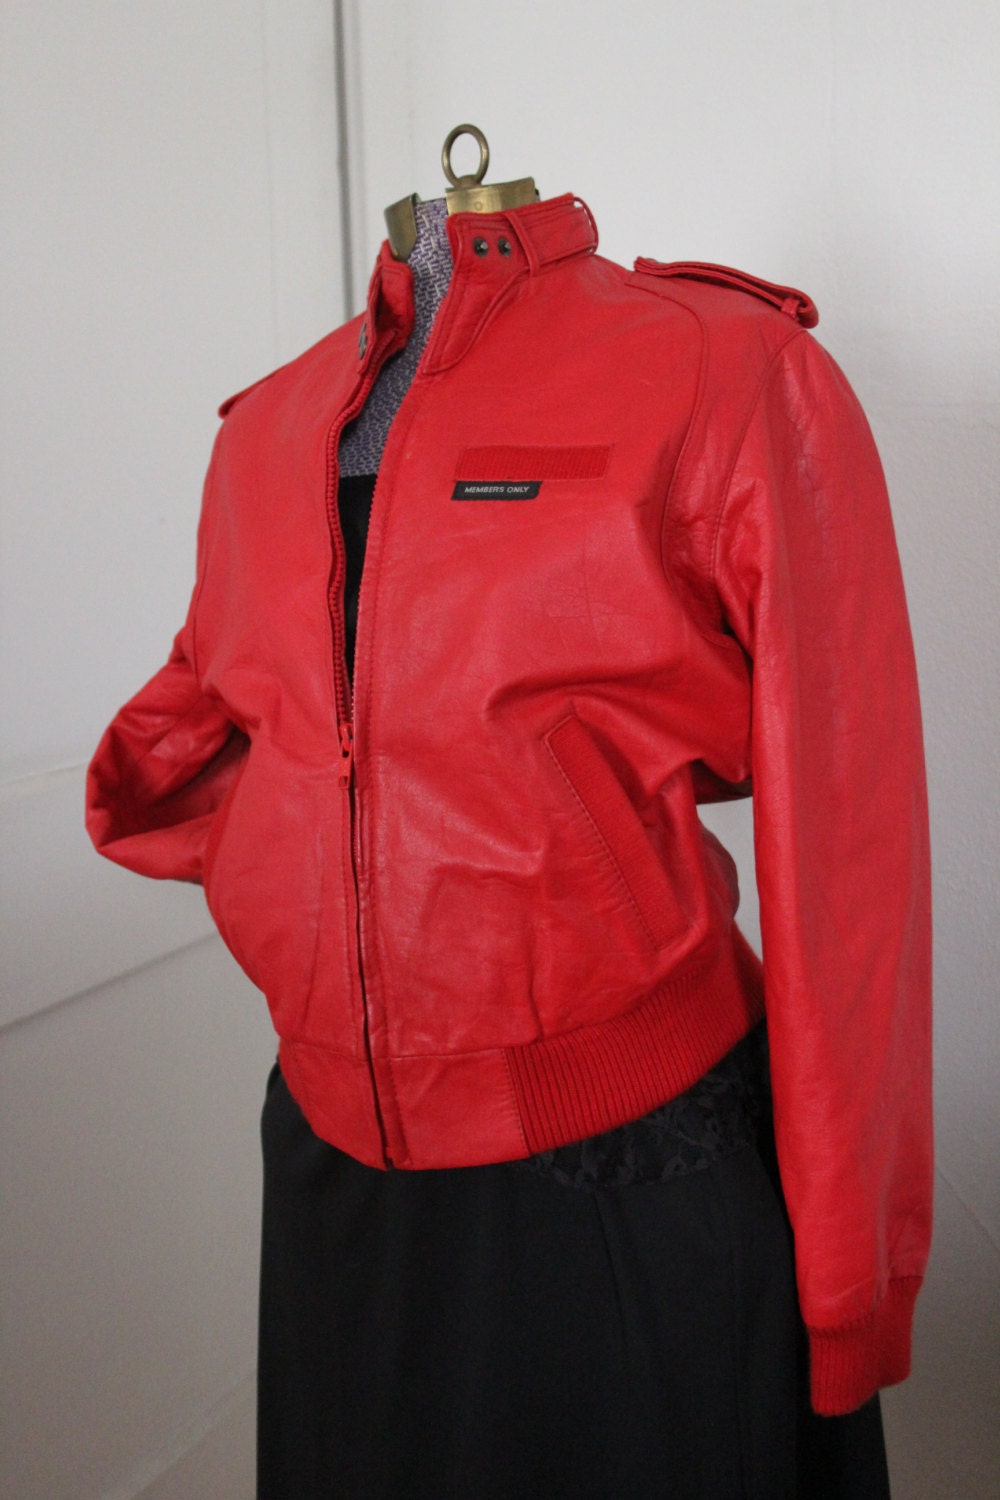 michael jackson members only jacket 80s